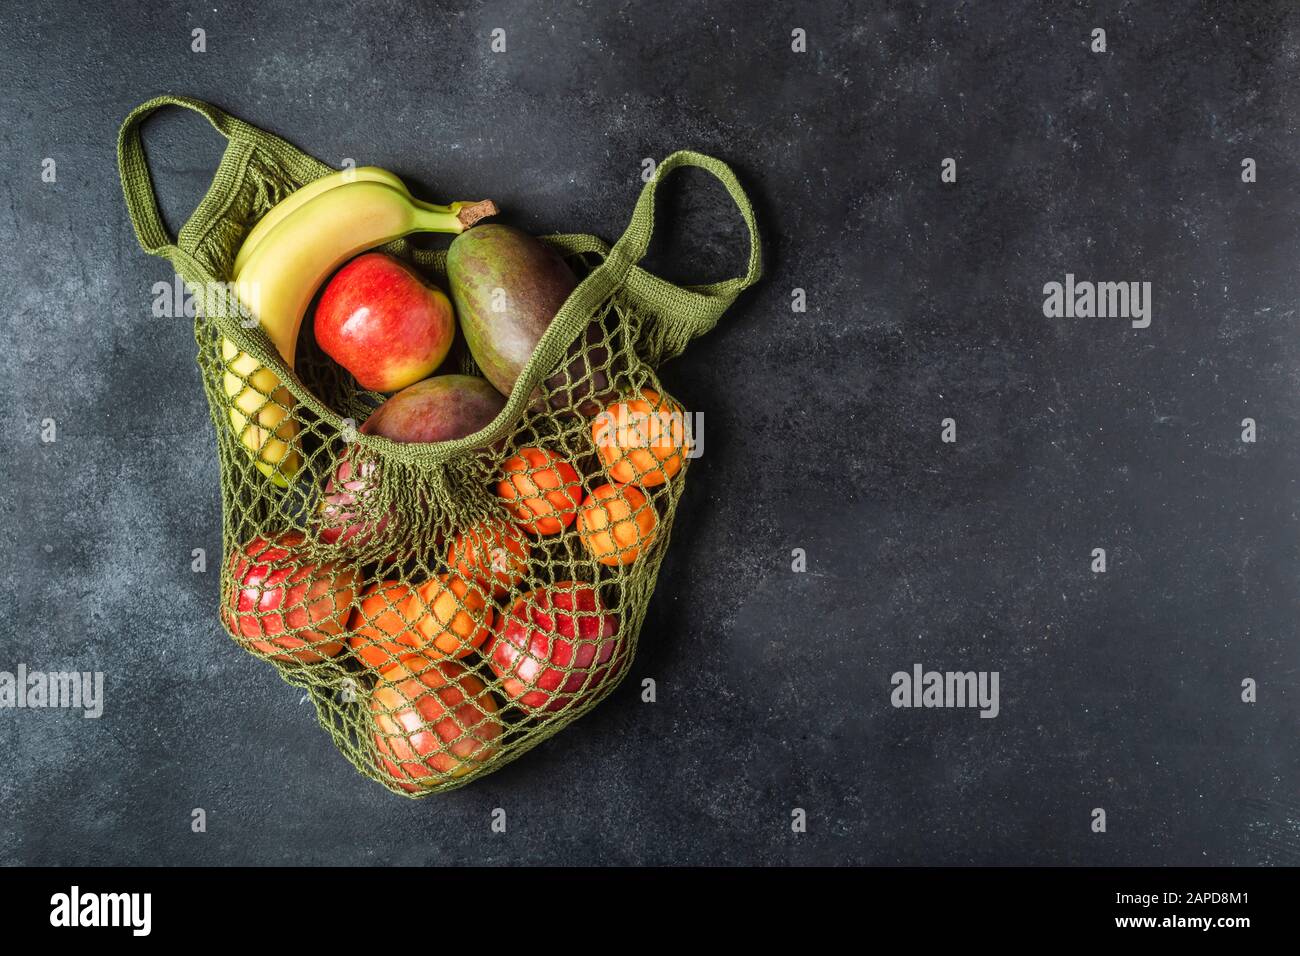 Fresh fruit in a green string bag on a black background. Bananas, apples, oranges, and mangoes. Stock Photo